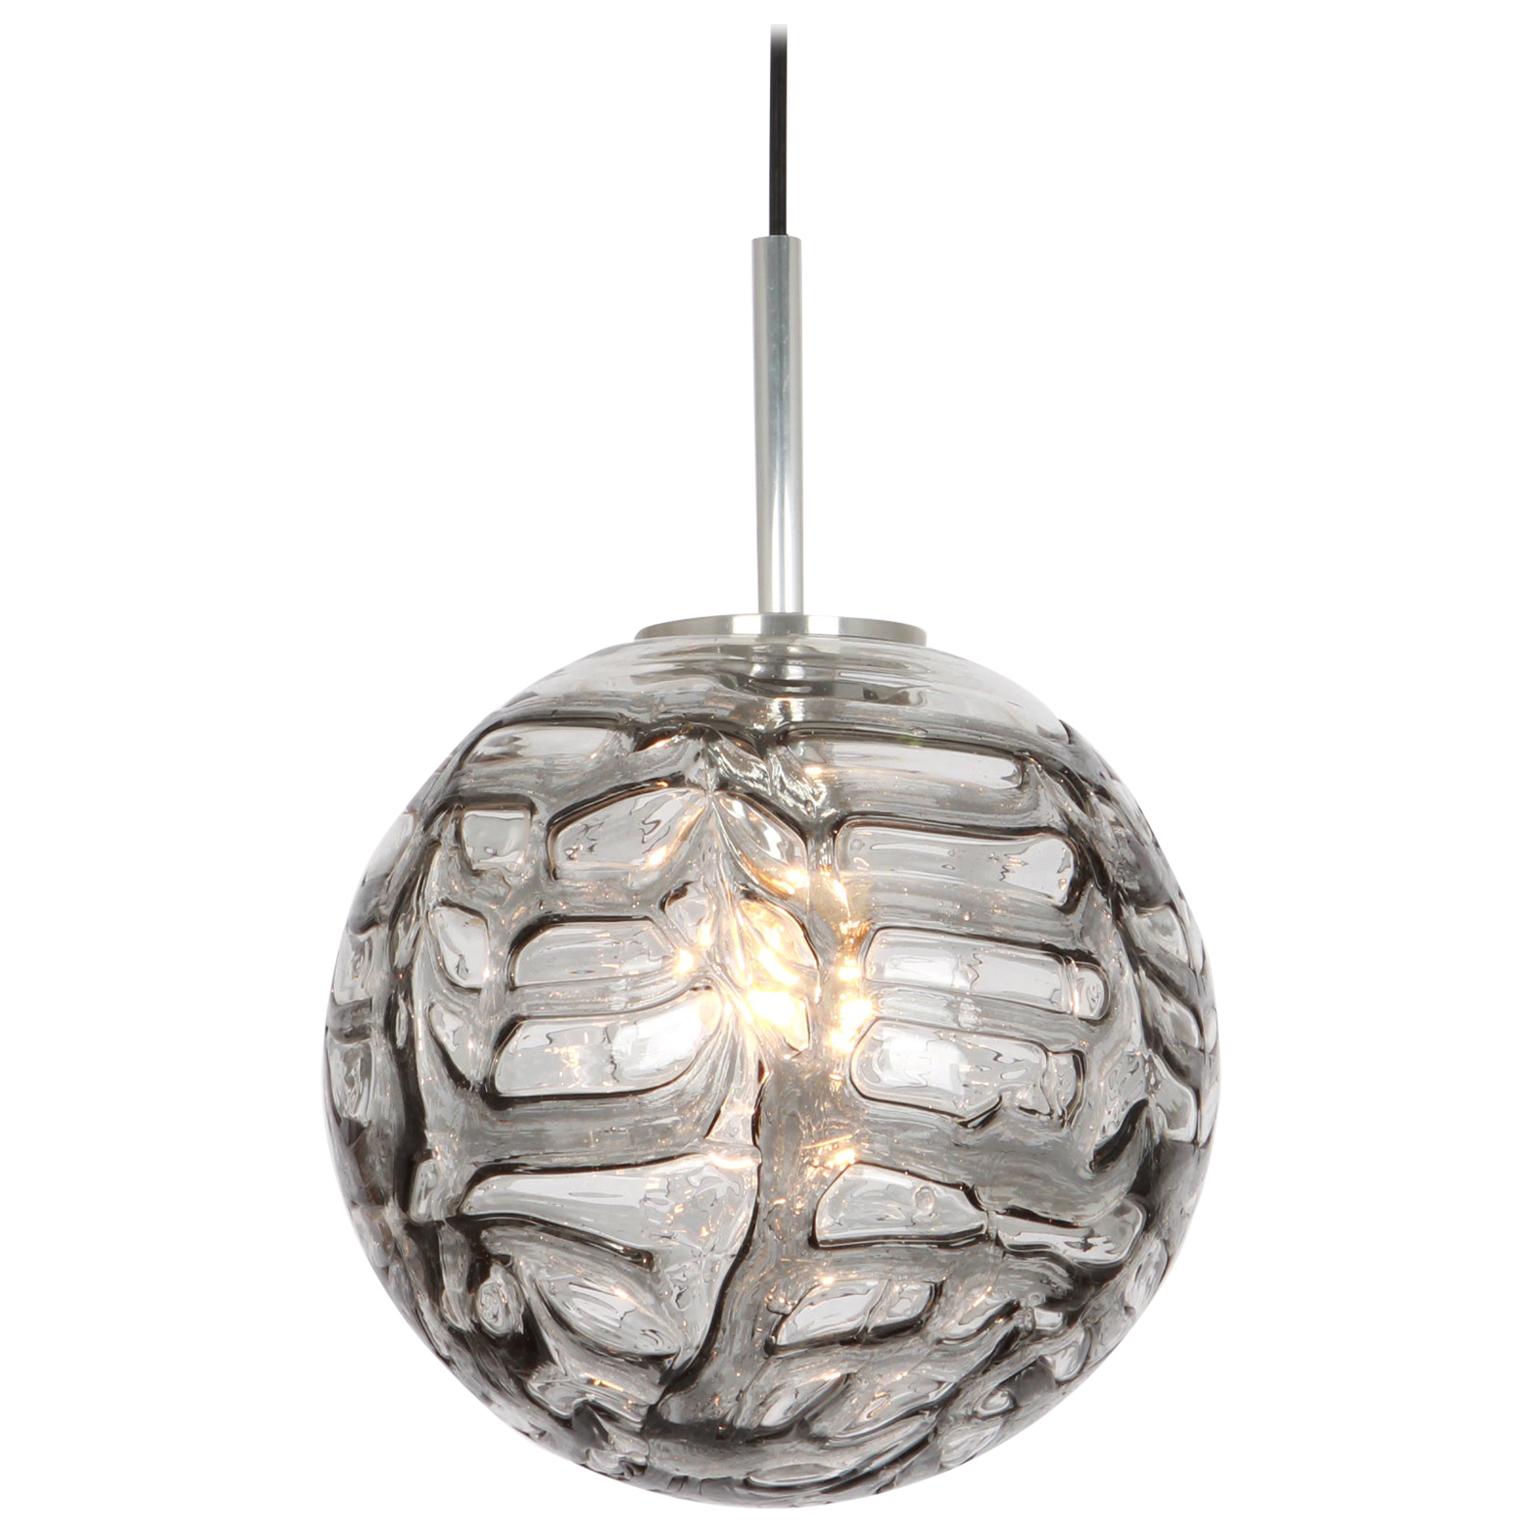 Doria ceiling light with large volcanic Murano glass ball.
High quality of materials, gives a wonderful light effect when it is on.

Sockets: One E27 standard bulbs. Max 100 Watts.
Light bulbs are not included. It is possible to install this